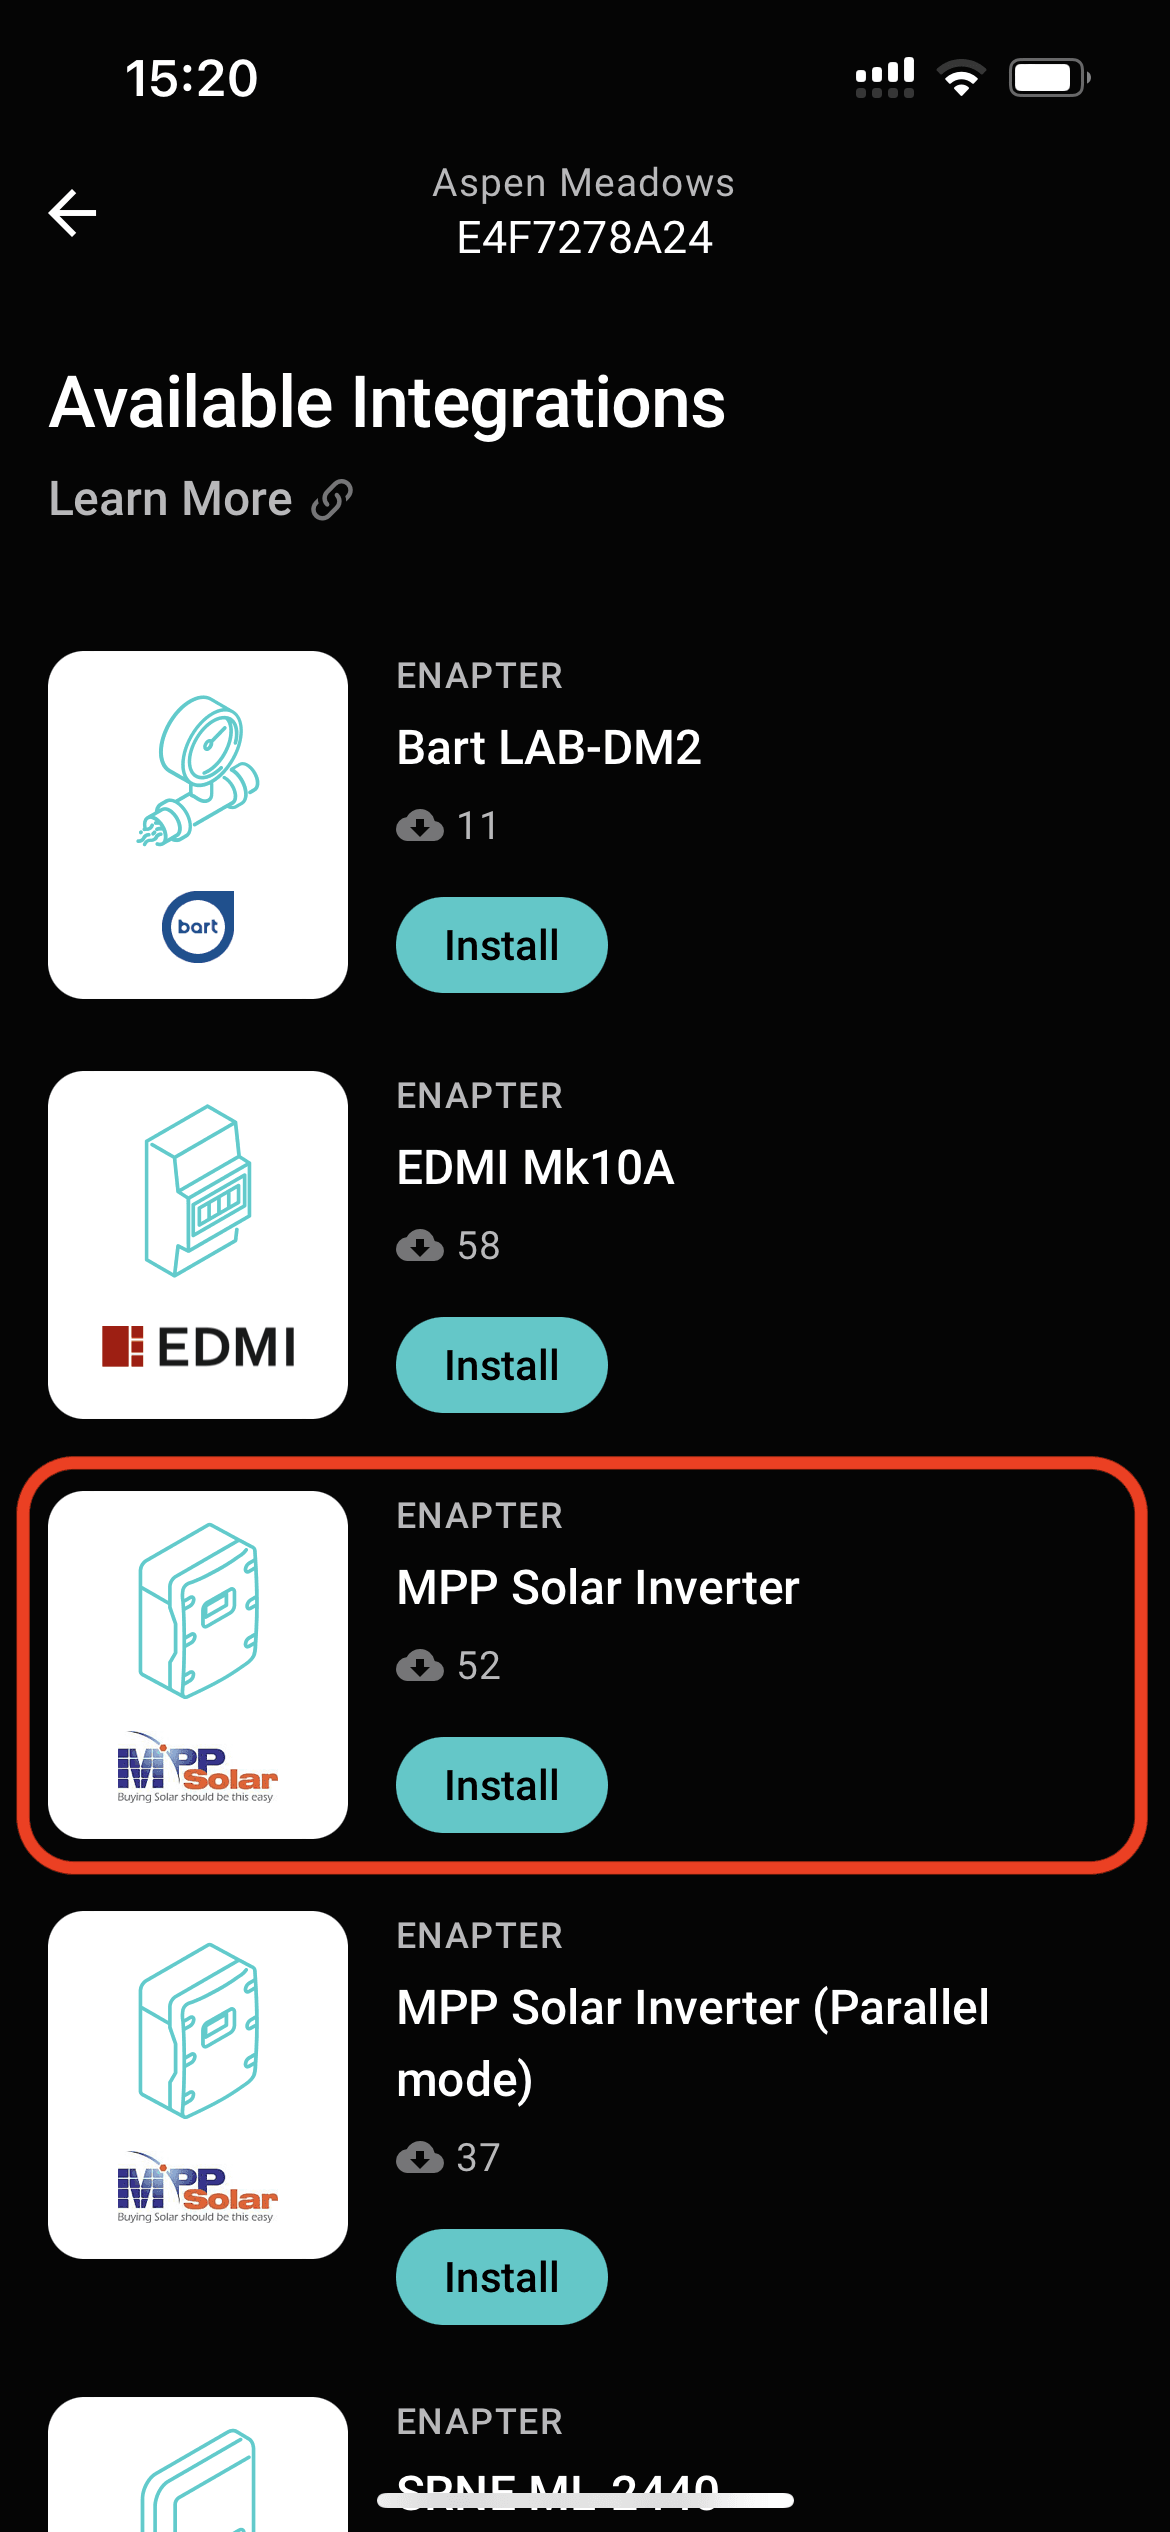 Find MPP Solar Inverter blueprint in the list and press Install